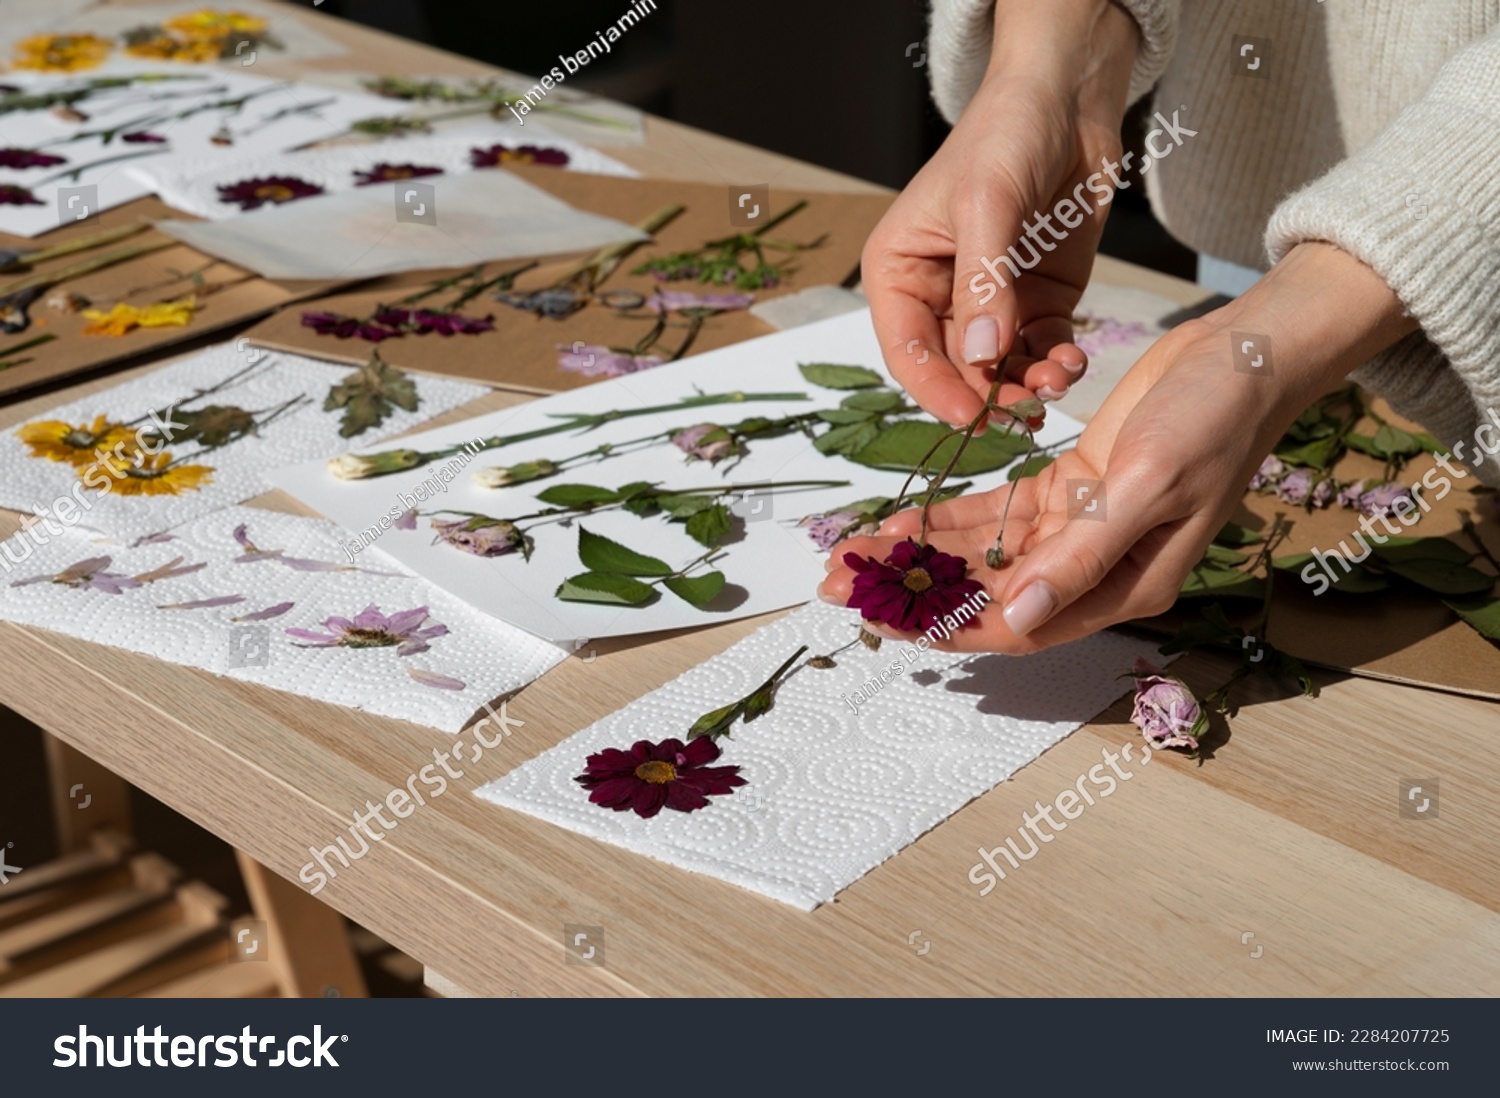 pressed flowers. flat pressed dried flower background. Dry pressed flowers. making decoration with pressed flowers and leaves. Beautiful dried flowers. #2284207725